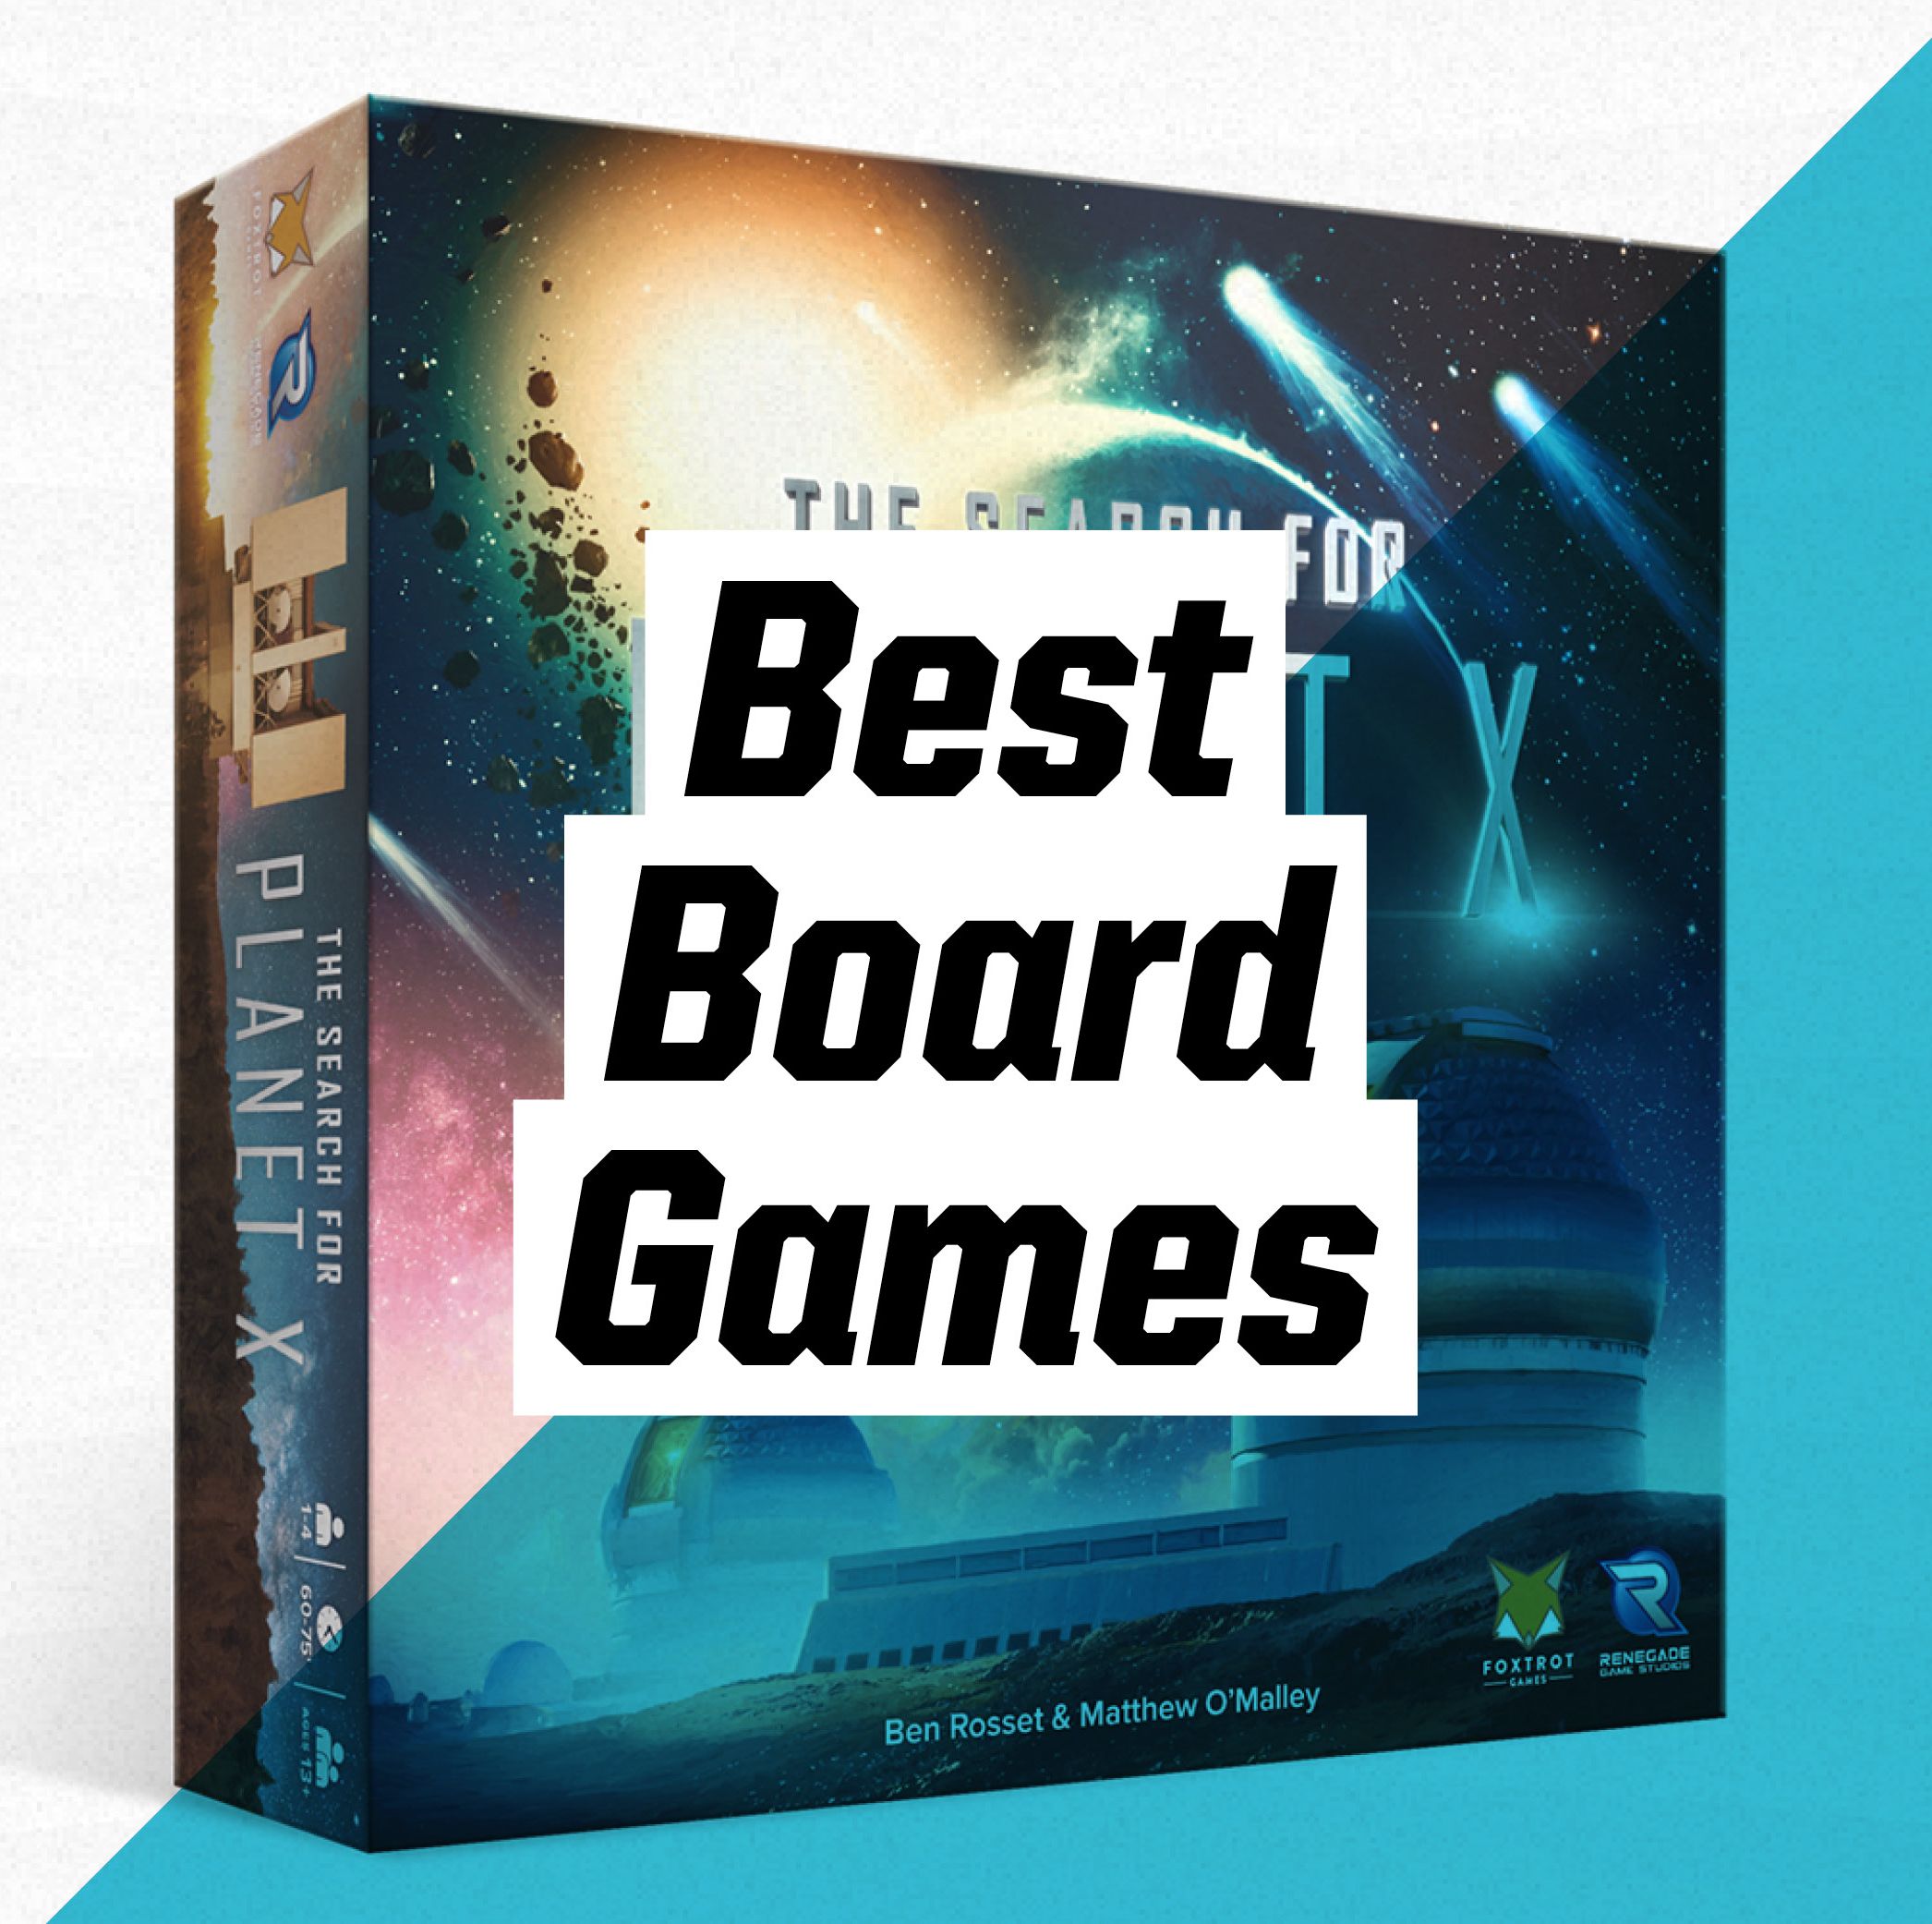 The Best New Board Games